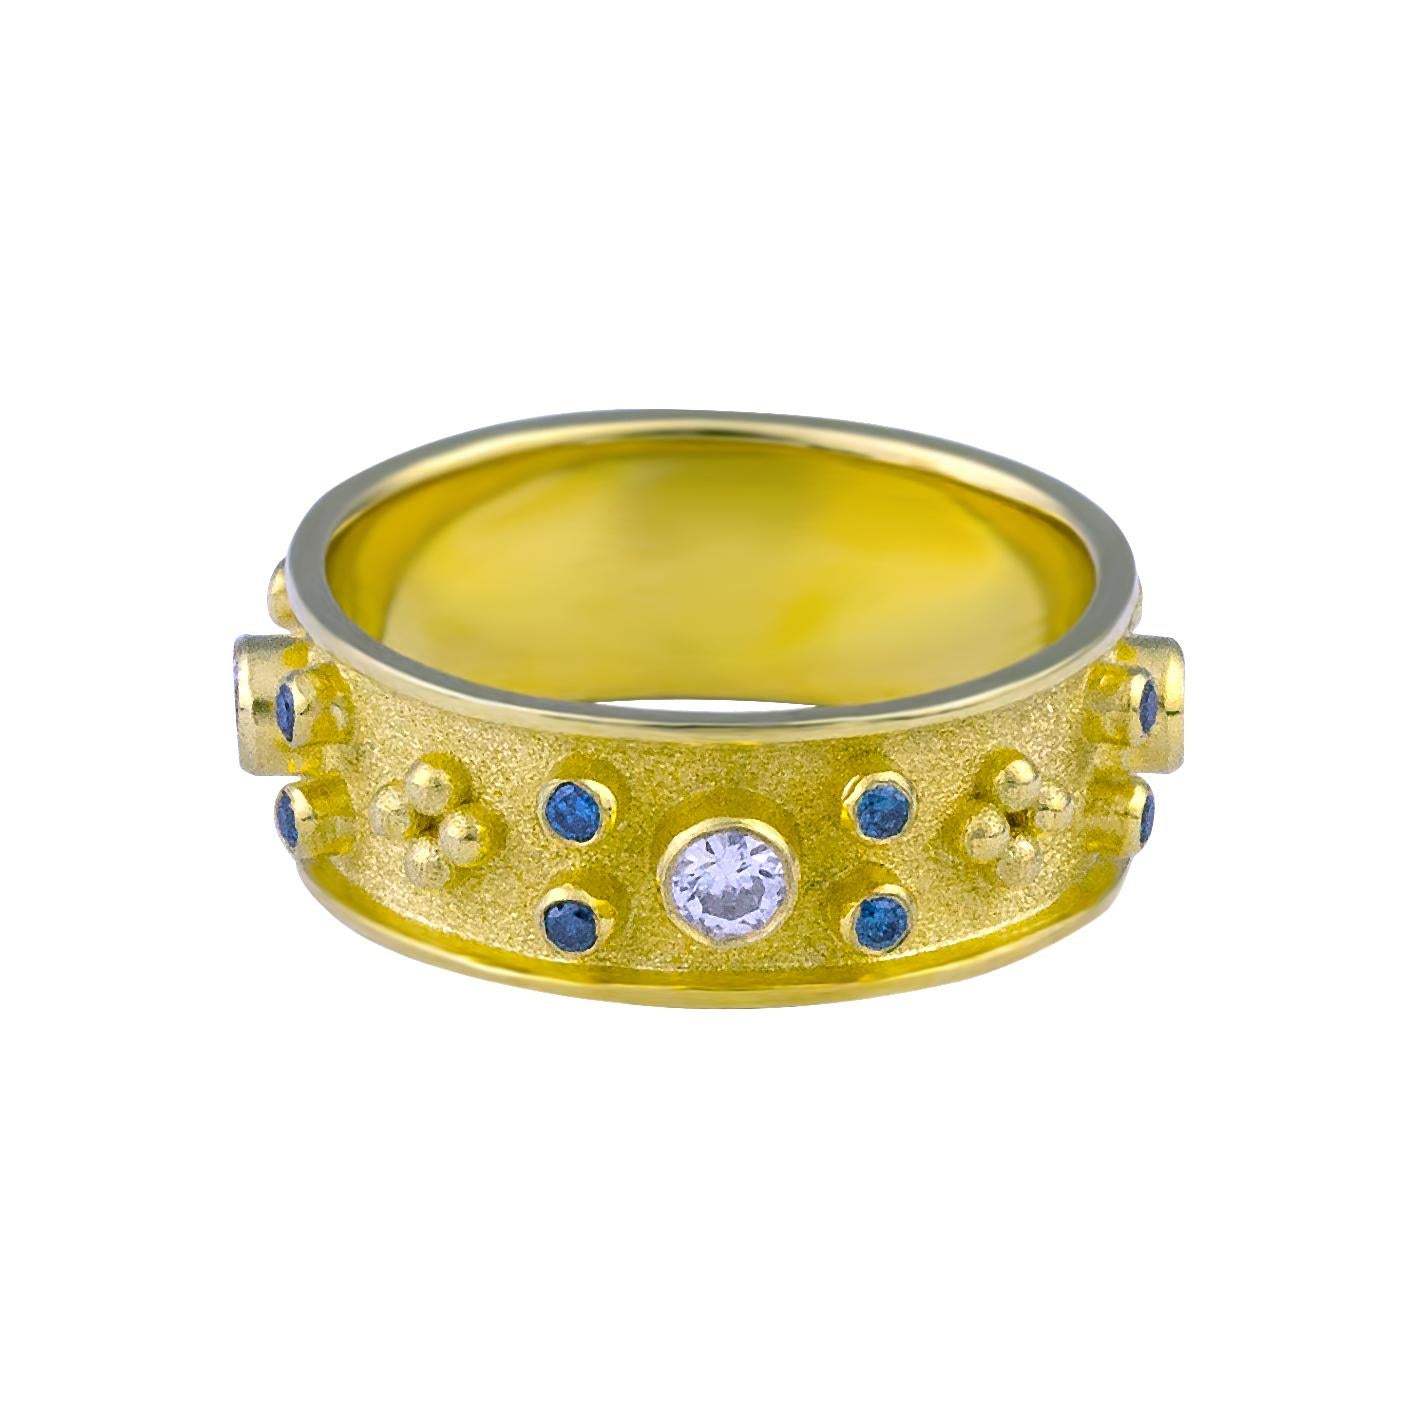 S.Georgios designer 18 Karat Solid Yellow Gold Band Ring all handmade with Byzantine granulation workmanship and a unique velvet background. The stunning ring has 4 brilliant cuts of White Diamonds with a total weight of 0.34 Carats and 16